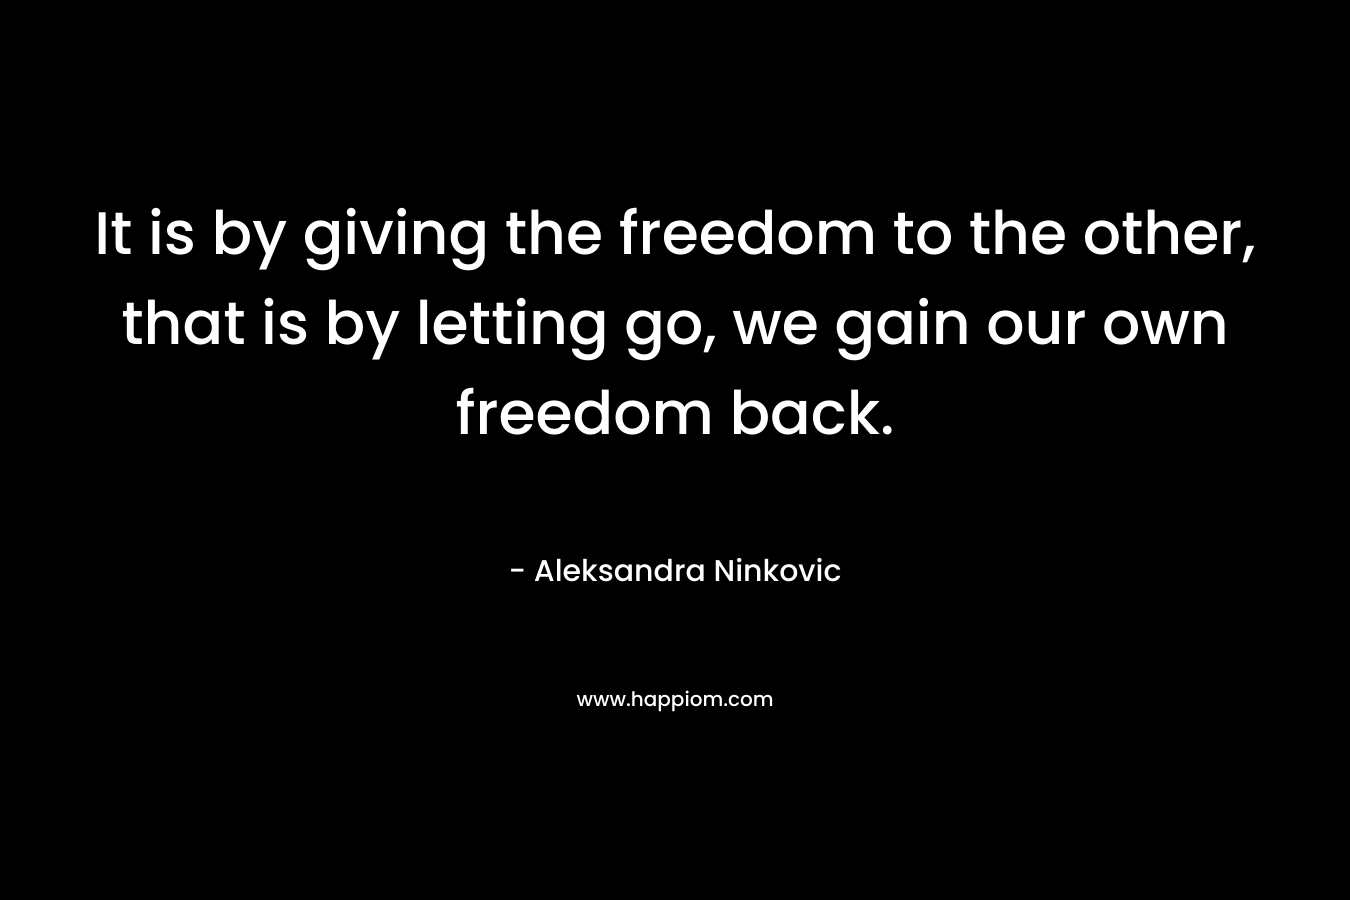 It is by giving the freedom to the other, that is by letting go, we gain our own freedom back. – Aleksandra Ninkovic